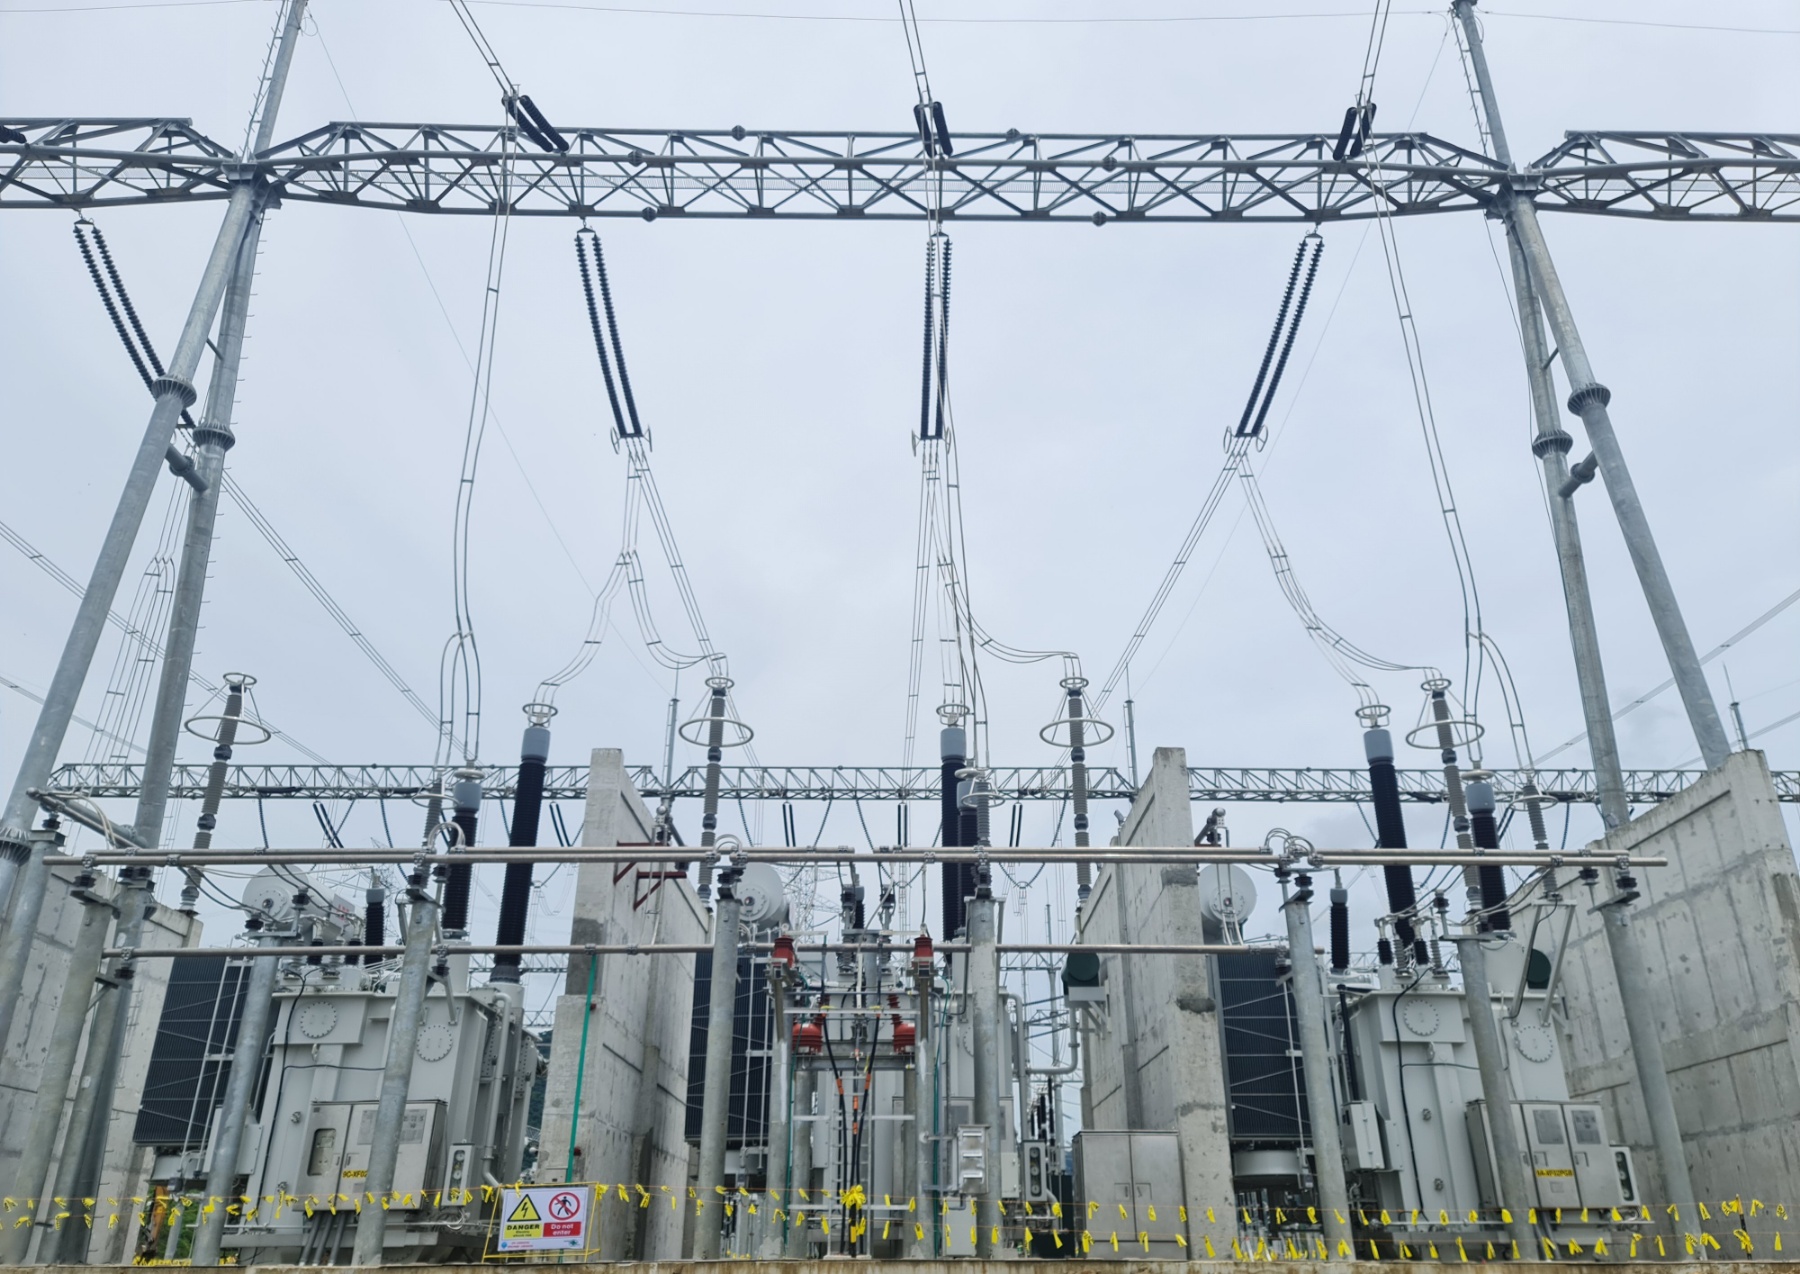 NGCP energizes PhP3.6 Billion extra high voltage substation project in Pagbilao